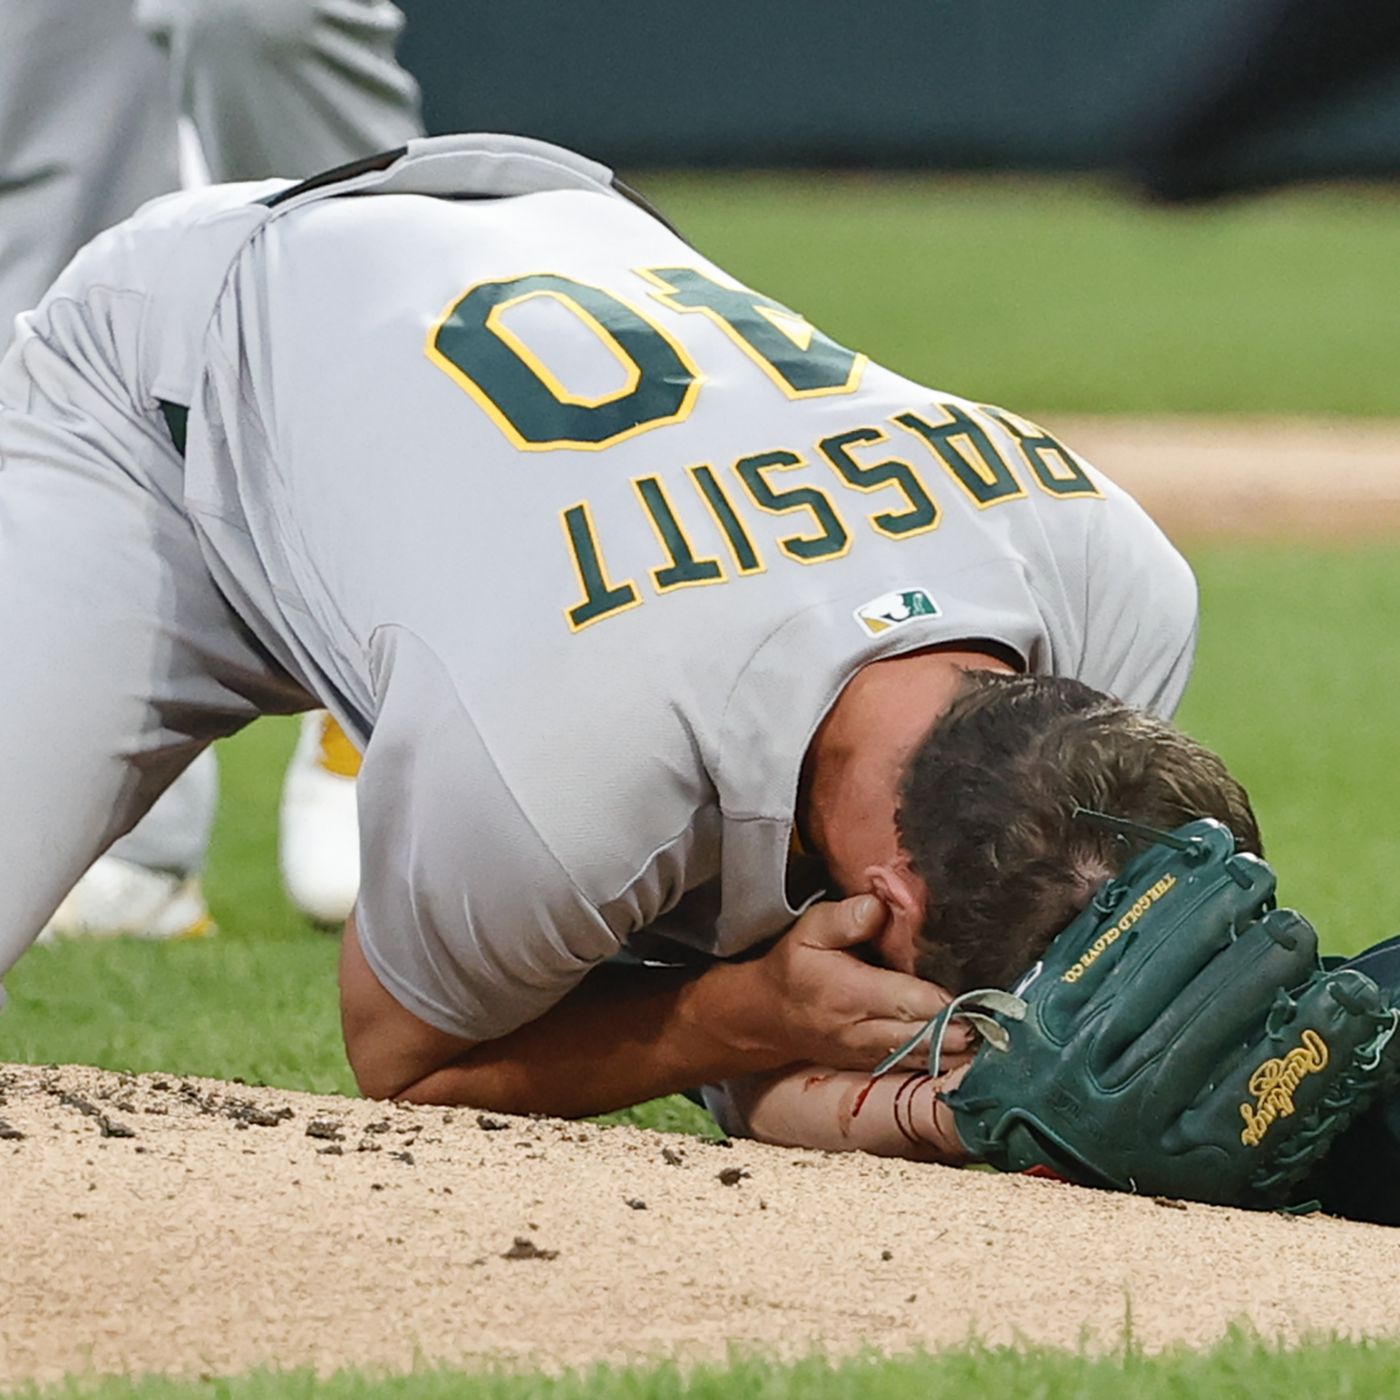 Chris Bassitt hit in head by line drive, leaves Oakland A's game ...